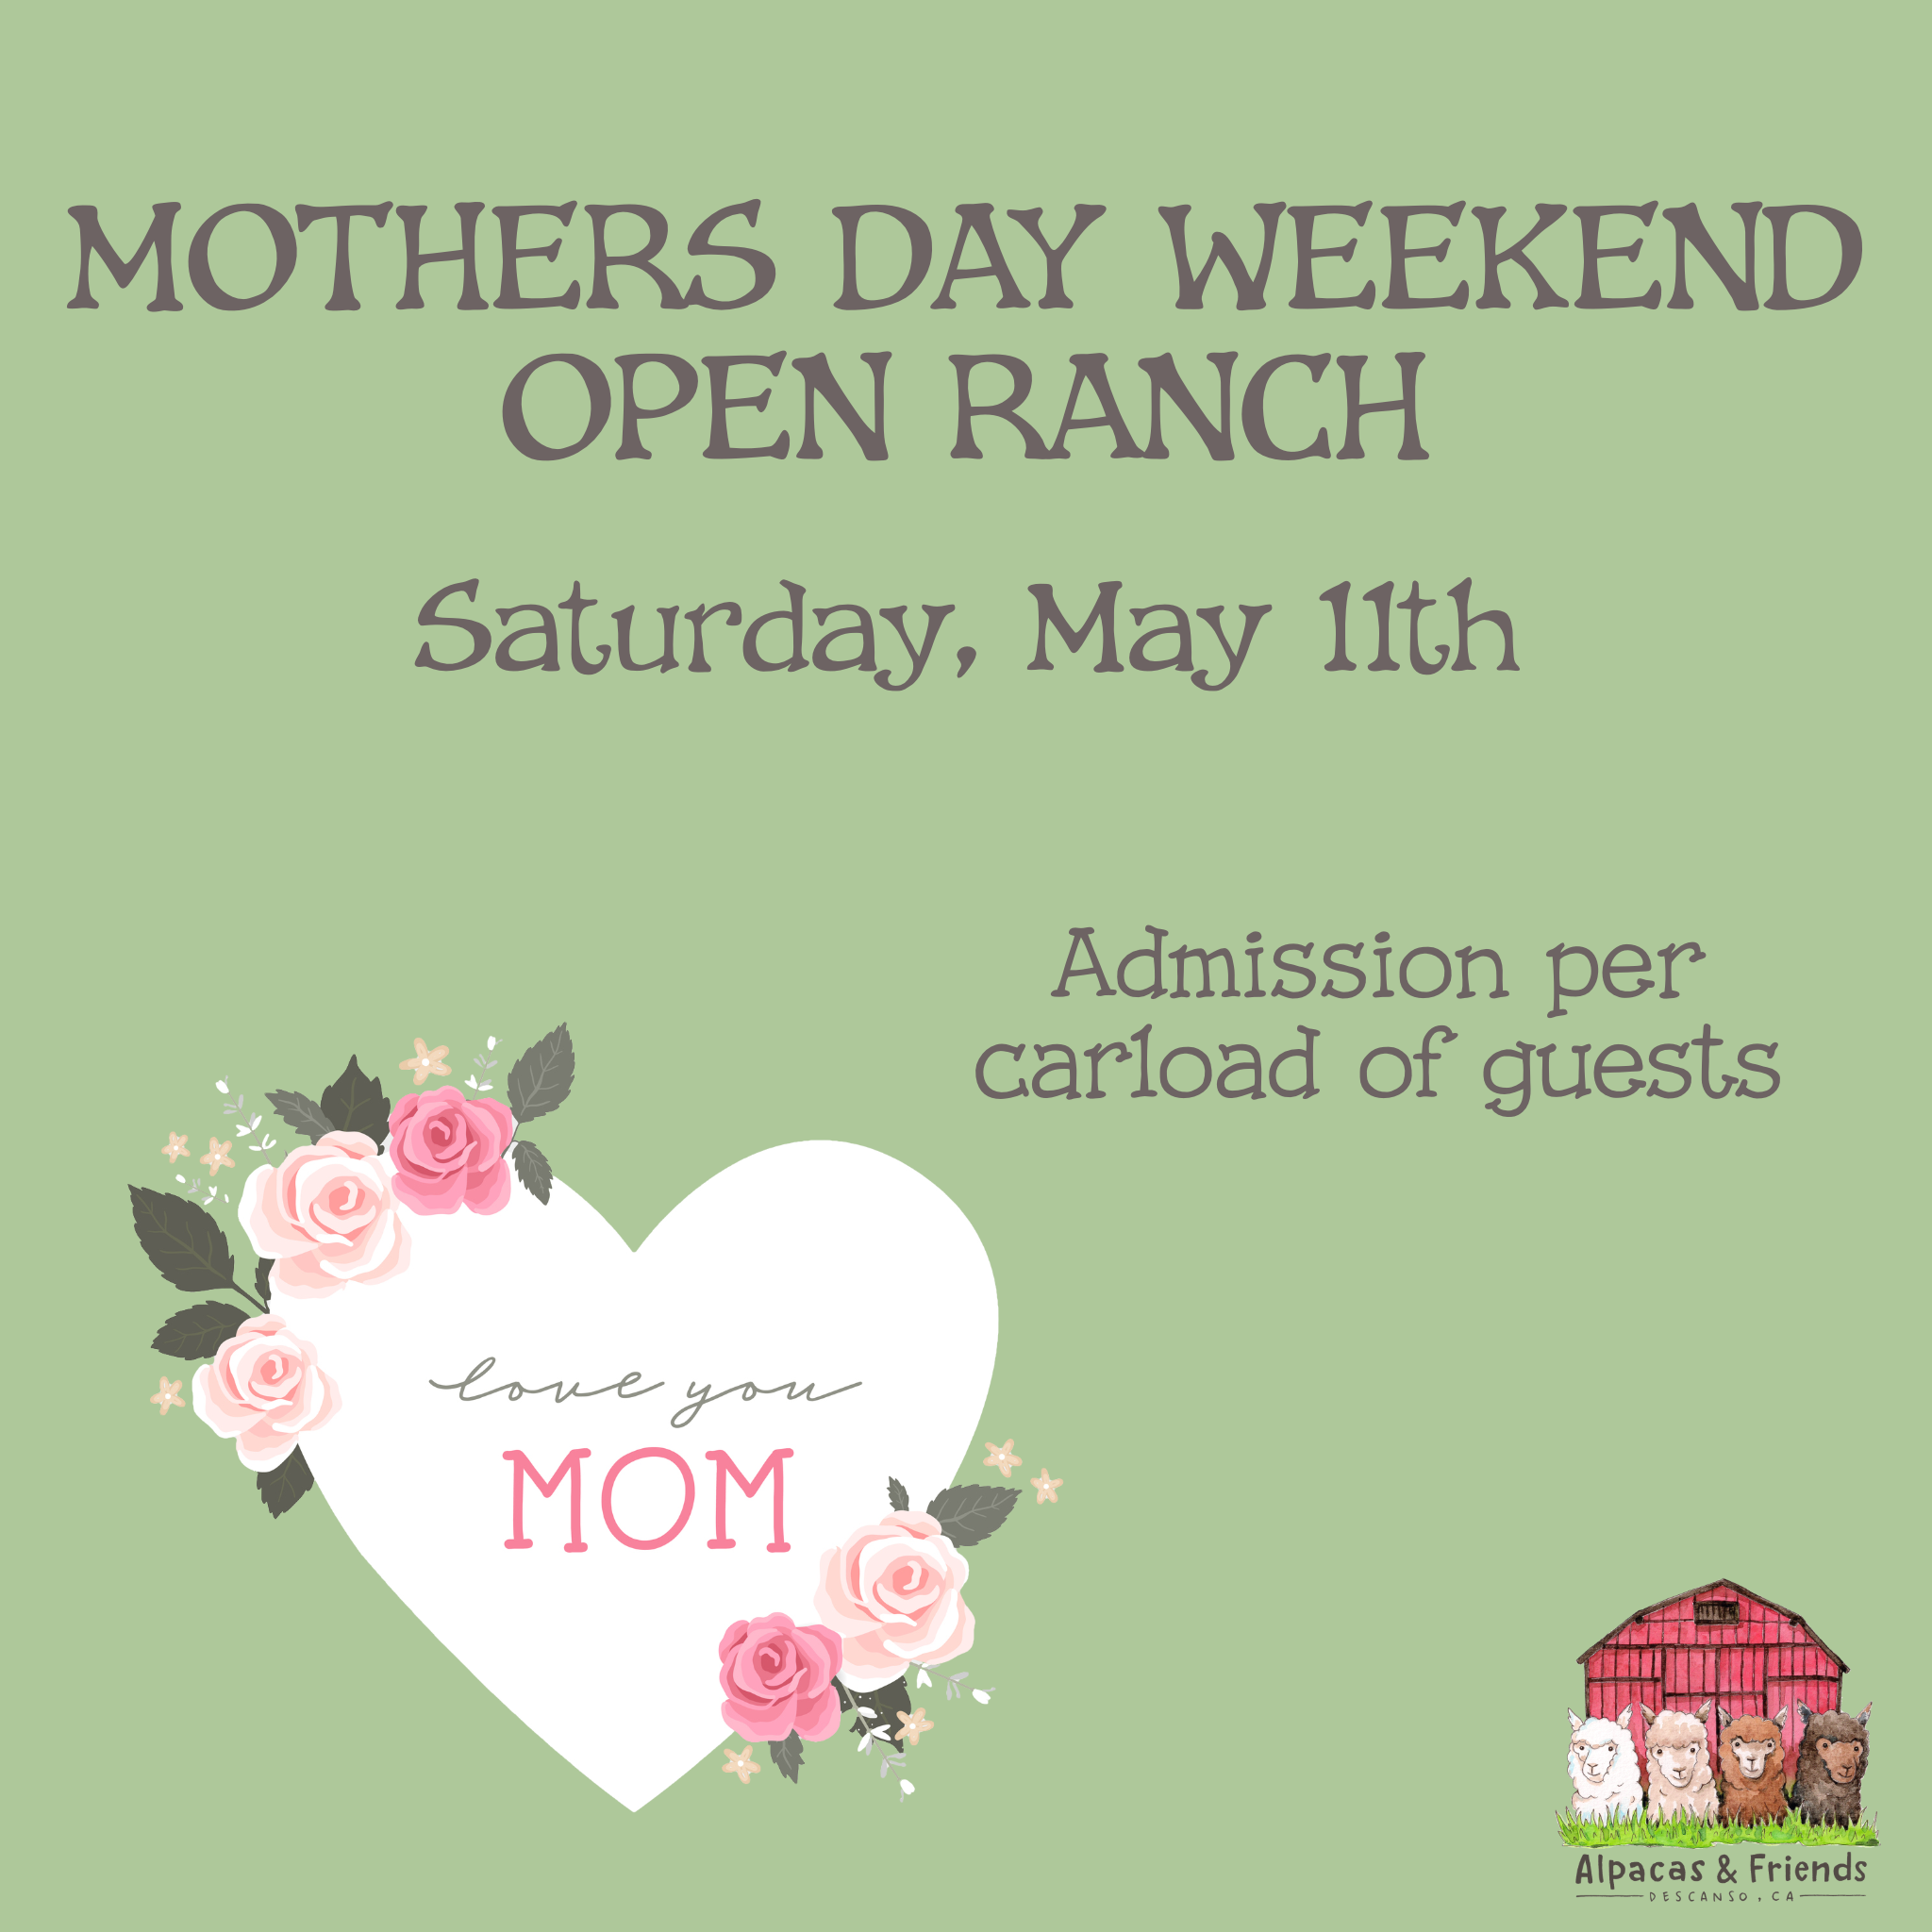 Mother's Day Weekend Open Ranch Reservation